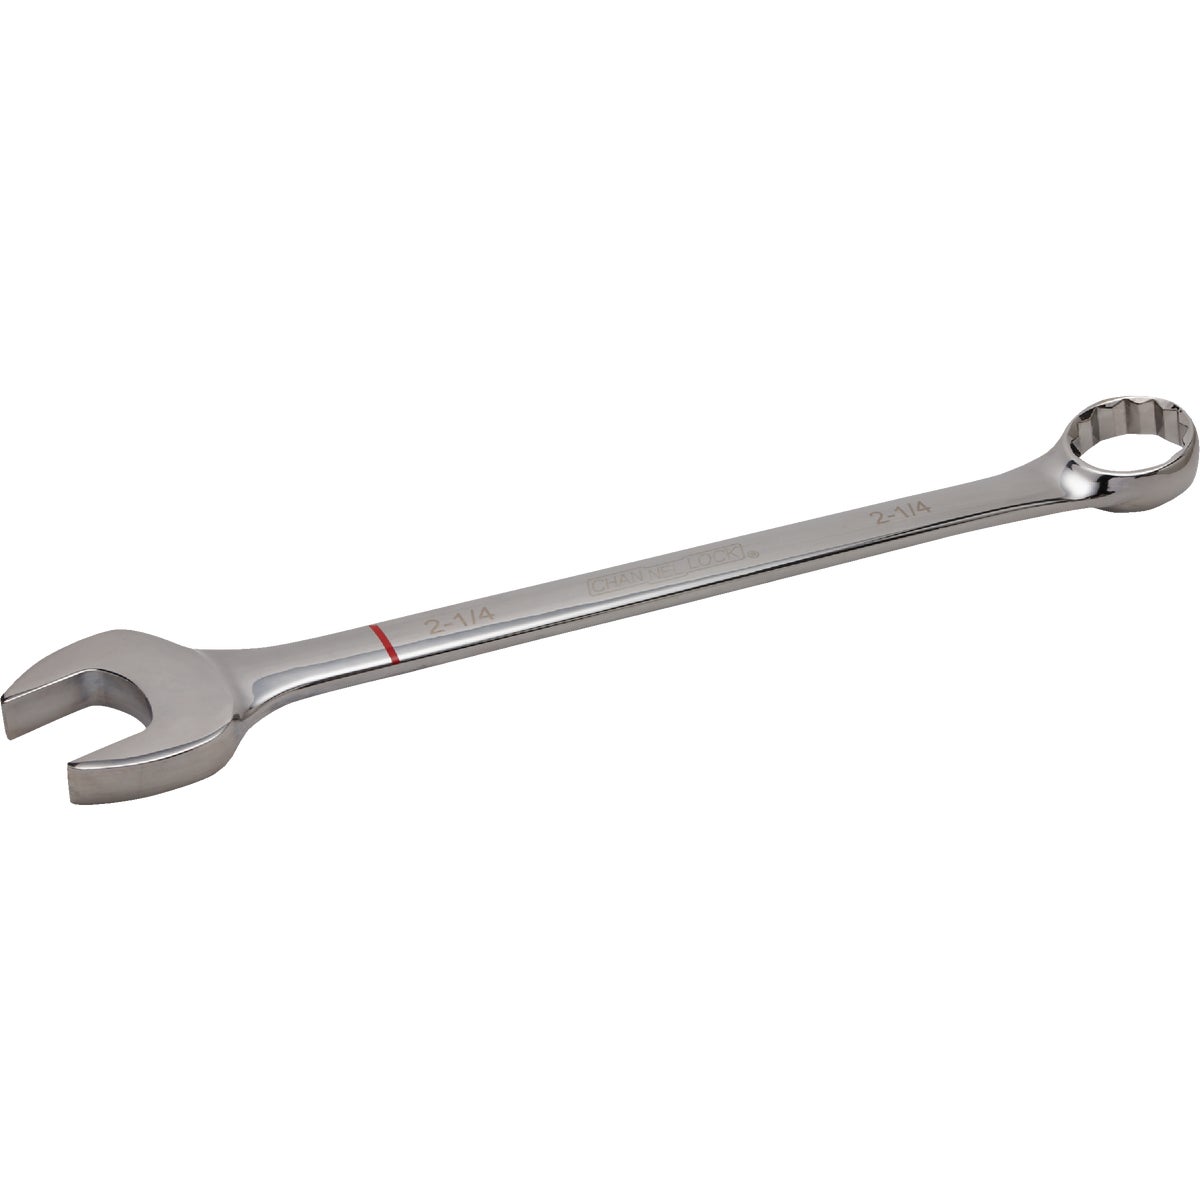 Channellock Standard 2-1/4" 12-Point Combination Wrench